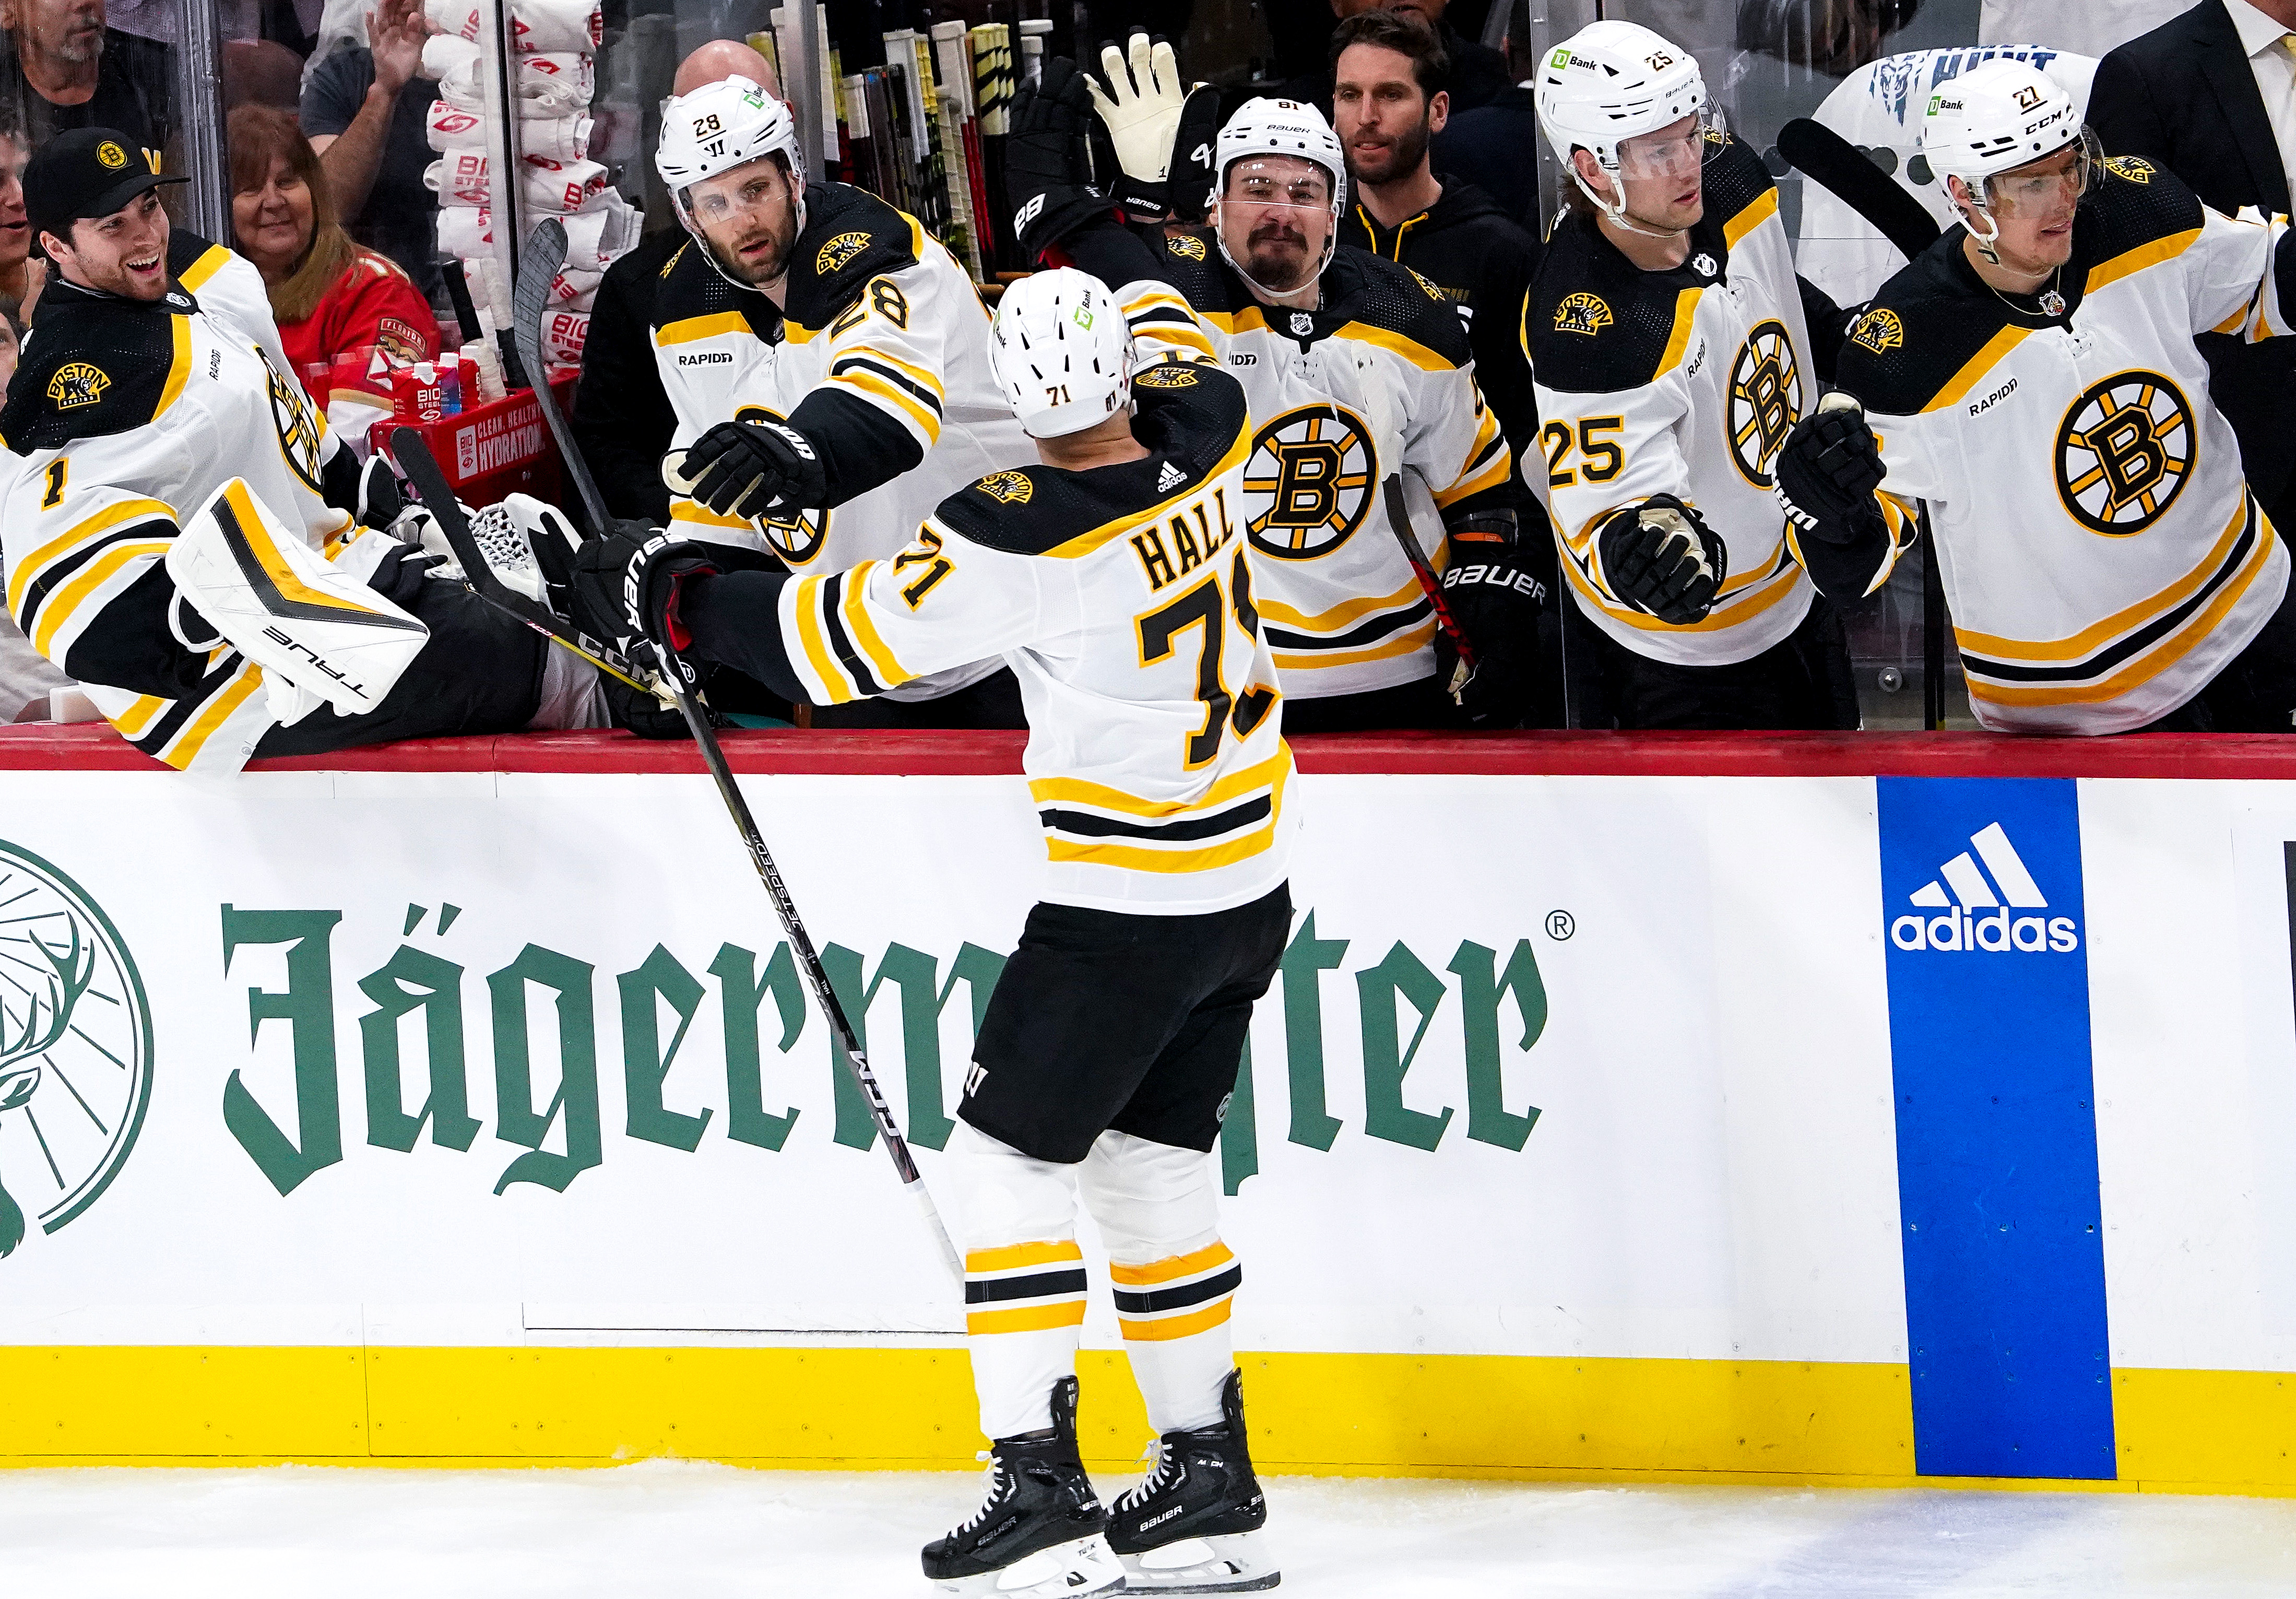 Bruins vs Panthers Live score, updates from NHL Playoffs Game 4